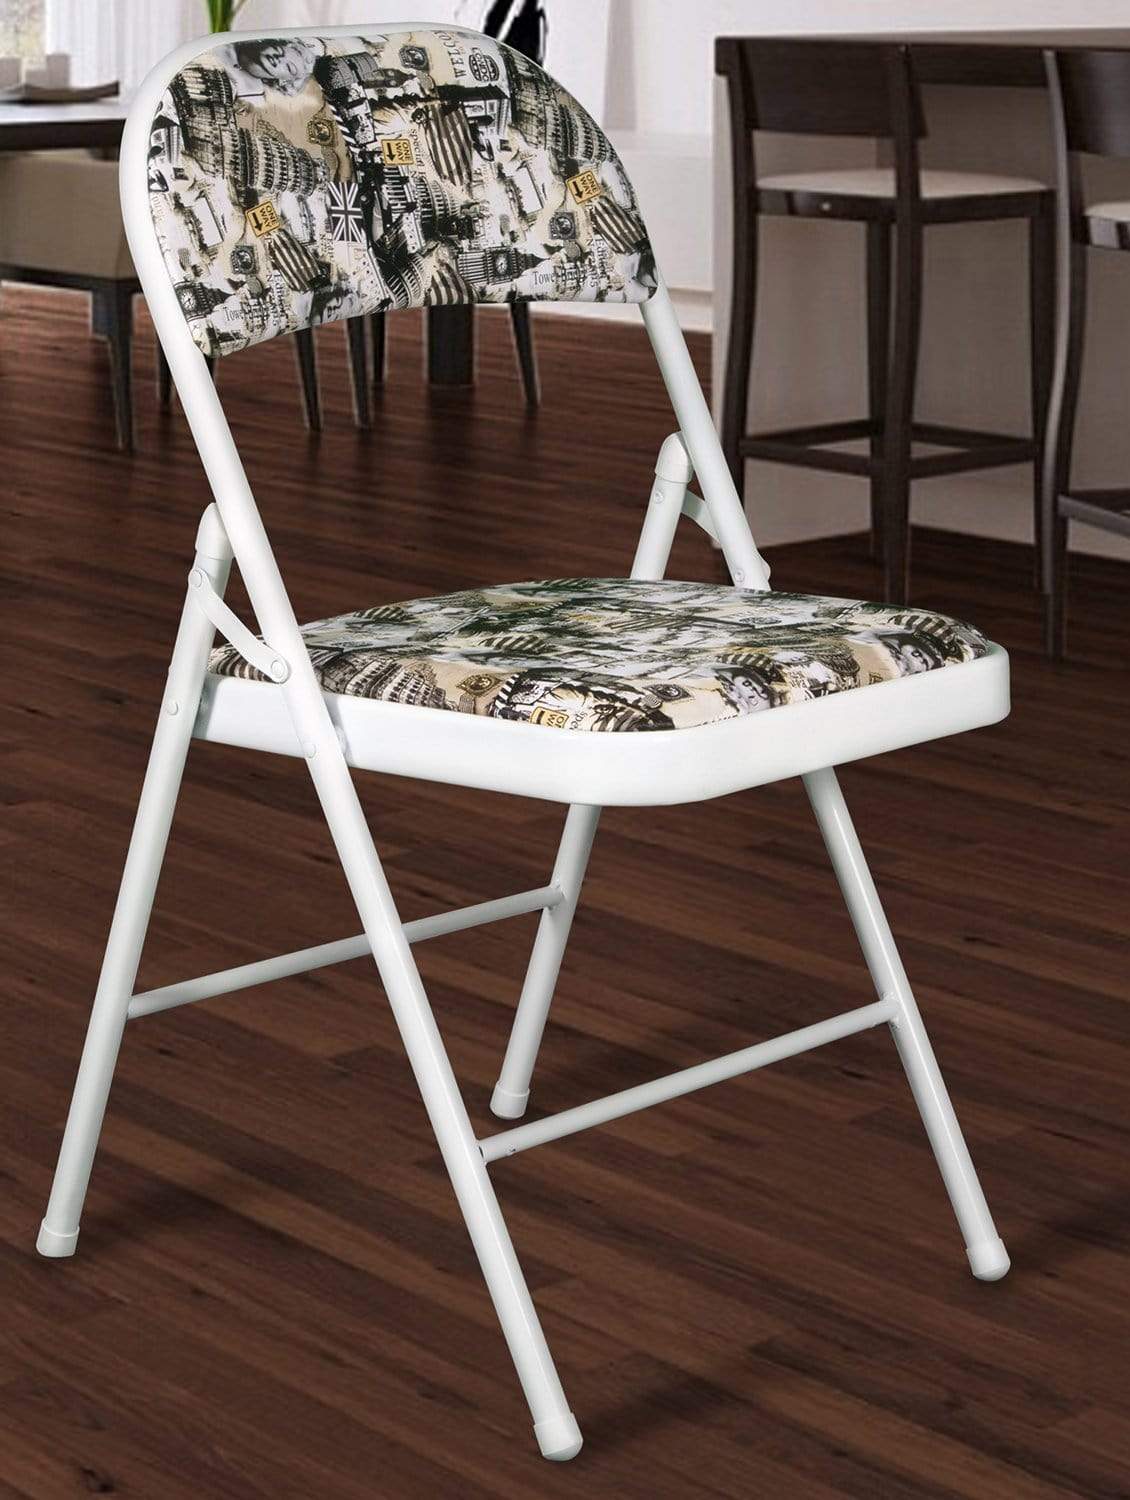 Padded Multicolor Metal Cafe /Kitchen/ Garden and Outdoor Folding Chair